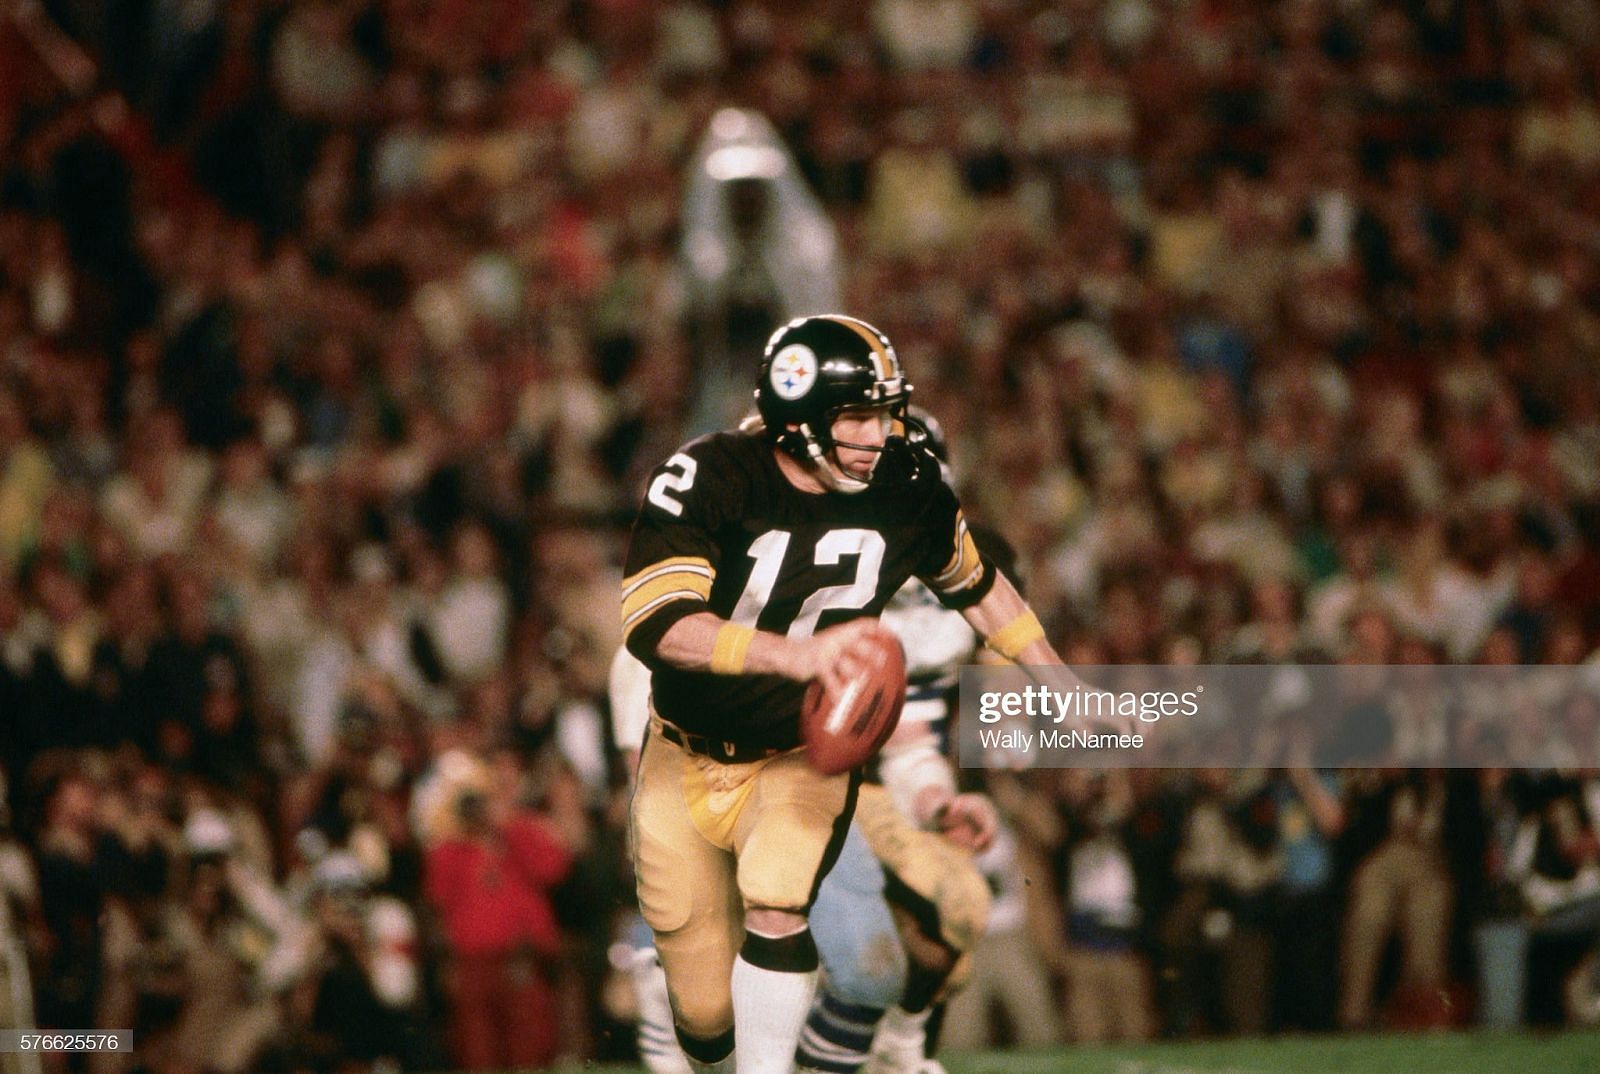 Pro Football Hall of Fame - Pittsburgh Steelers and Dallas Cowboys played  one of the most entertaining Super Bowls of the 70s in Super Bowl XIII as  Pittsburgh won 35-31. Terry Bradshaw